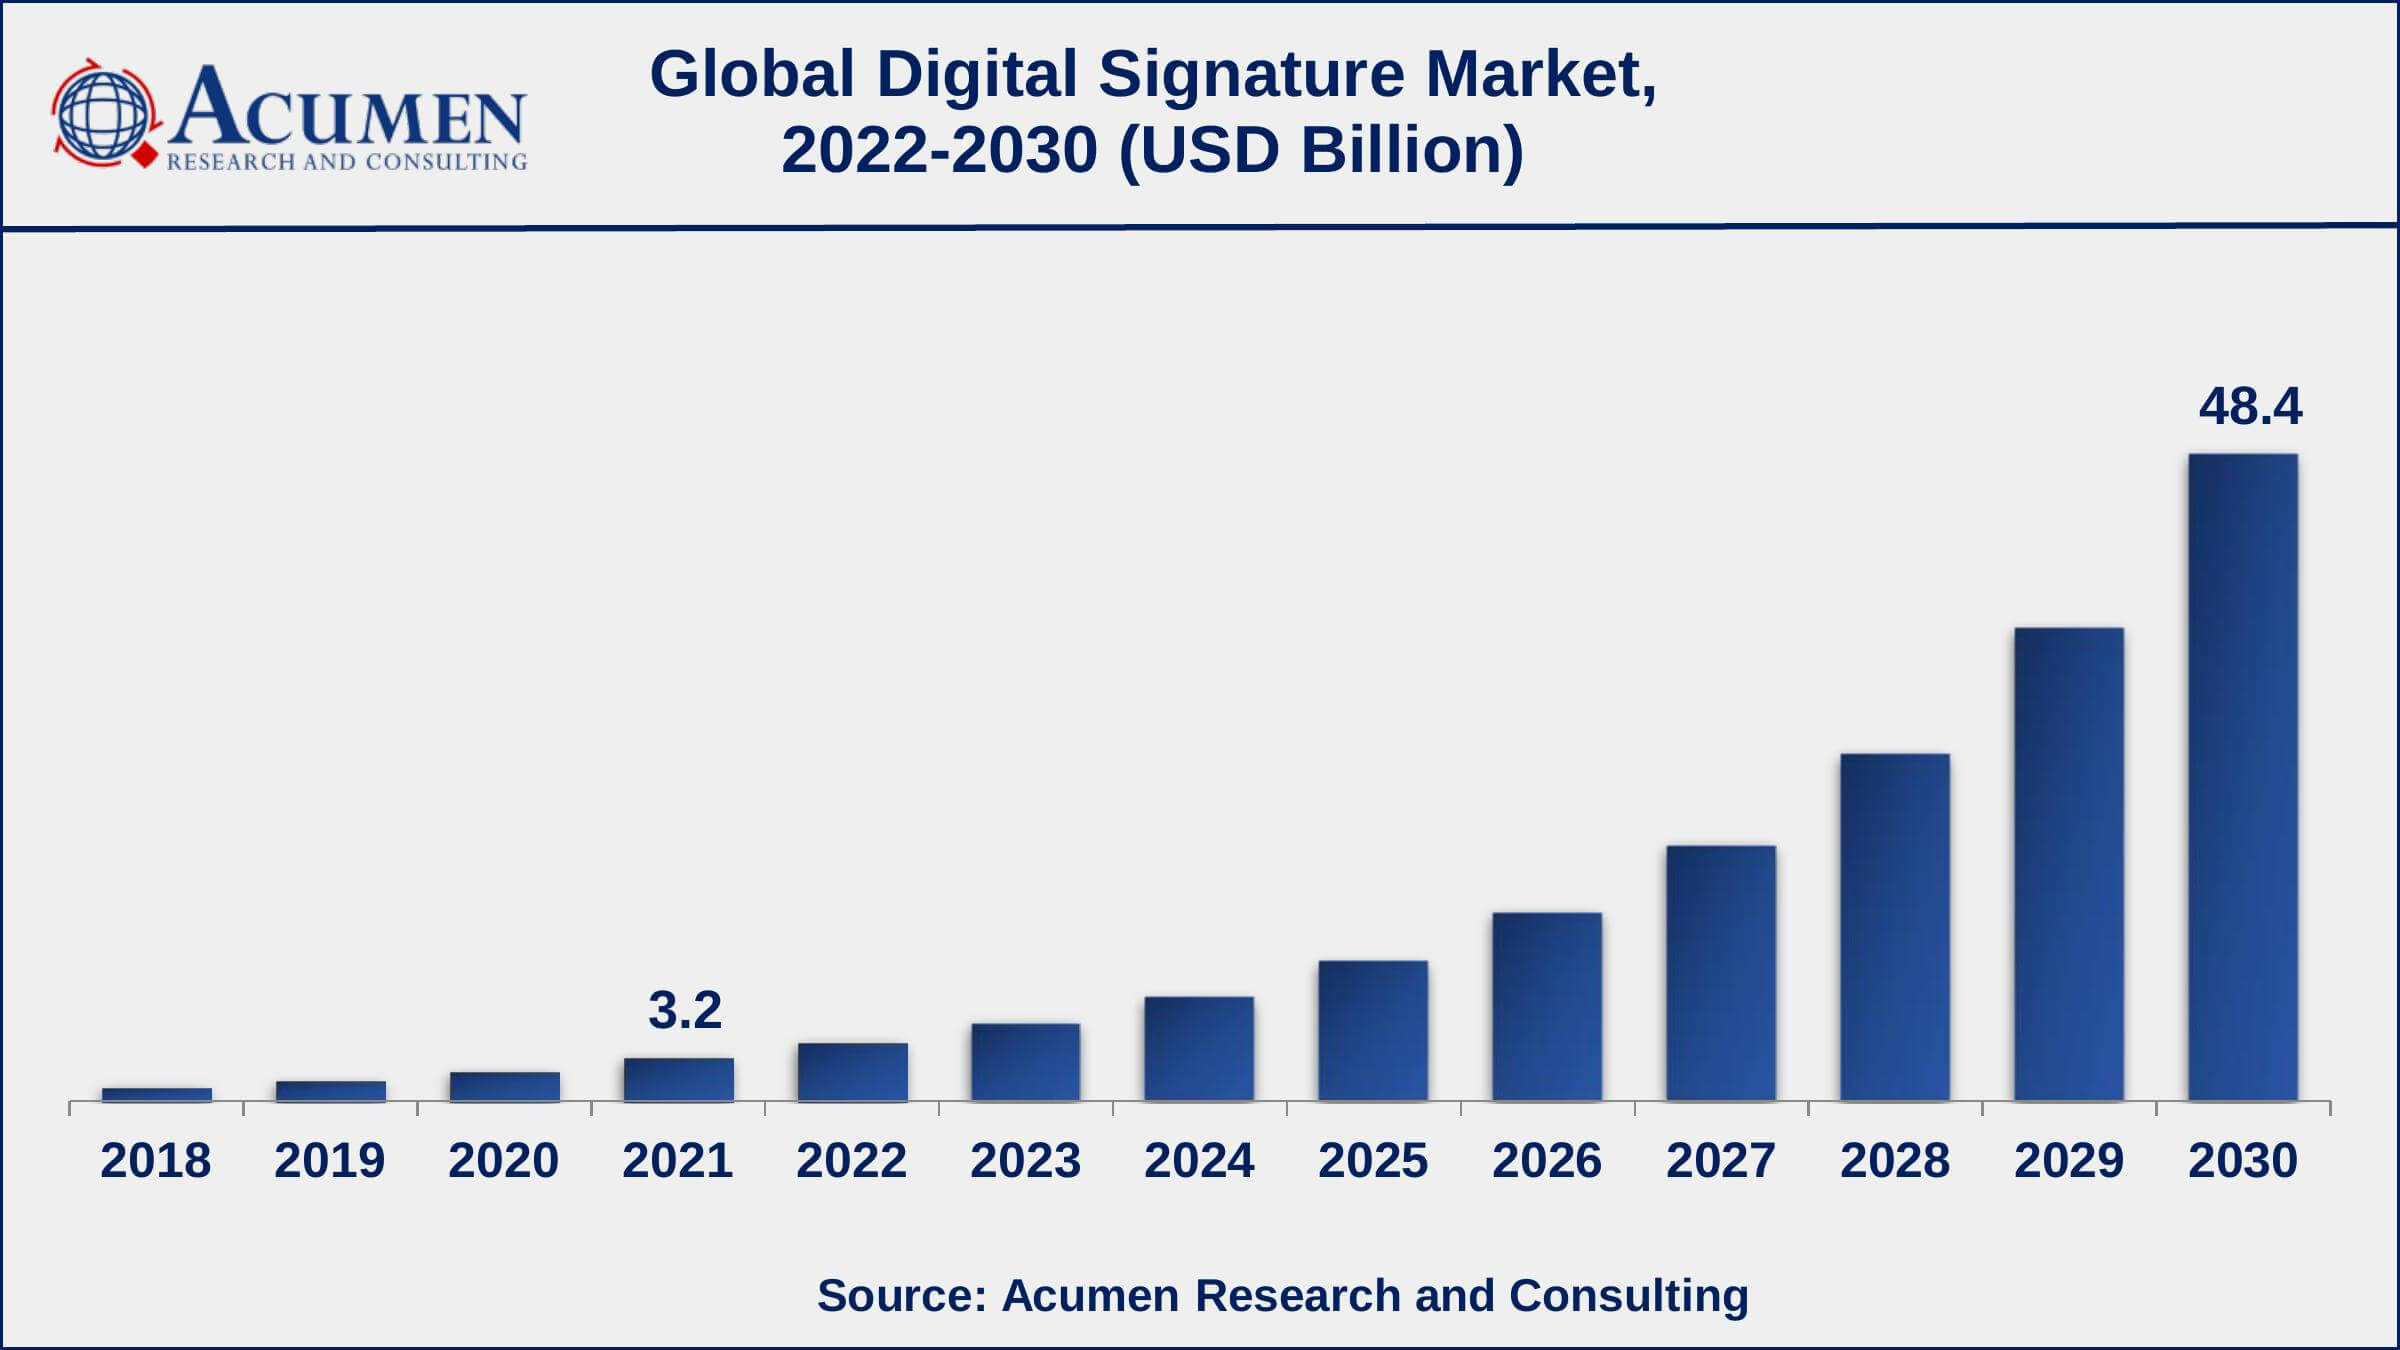 Asia-Pacific digital signature market growth will record a CAGR of more than 36% from 2022 to 2030